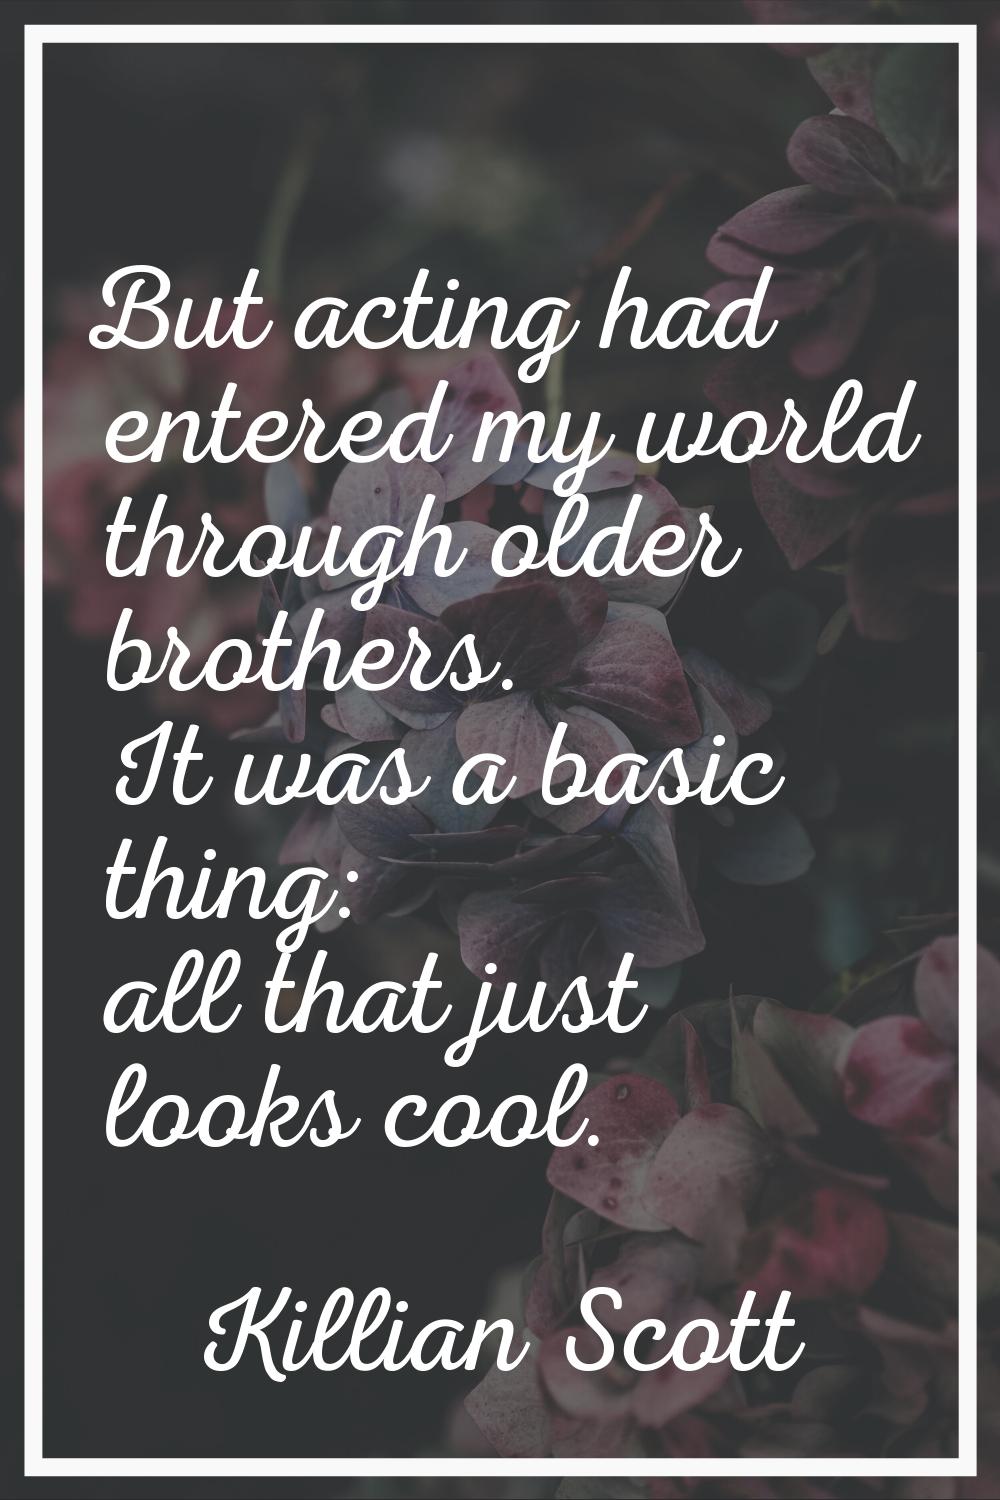 But acting had entered my world through older brothers. It was a basic thing: all that just looks c